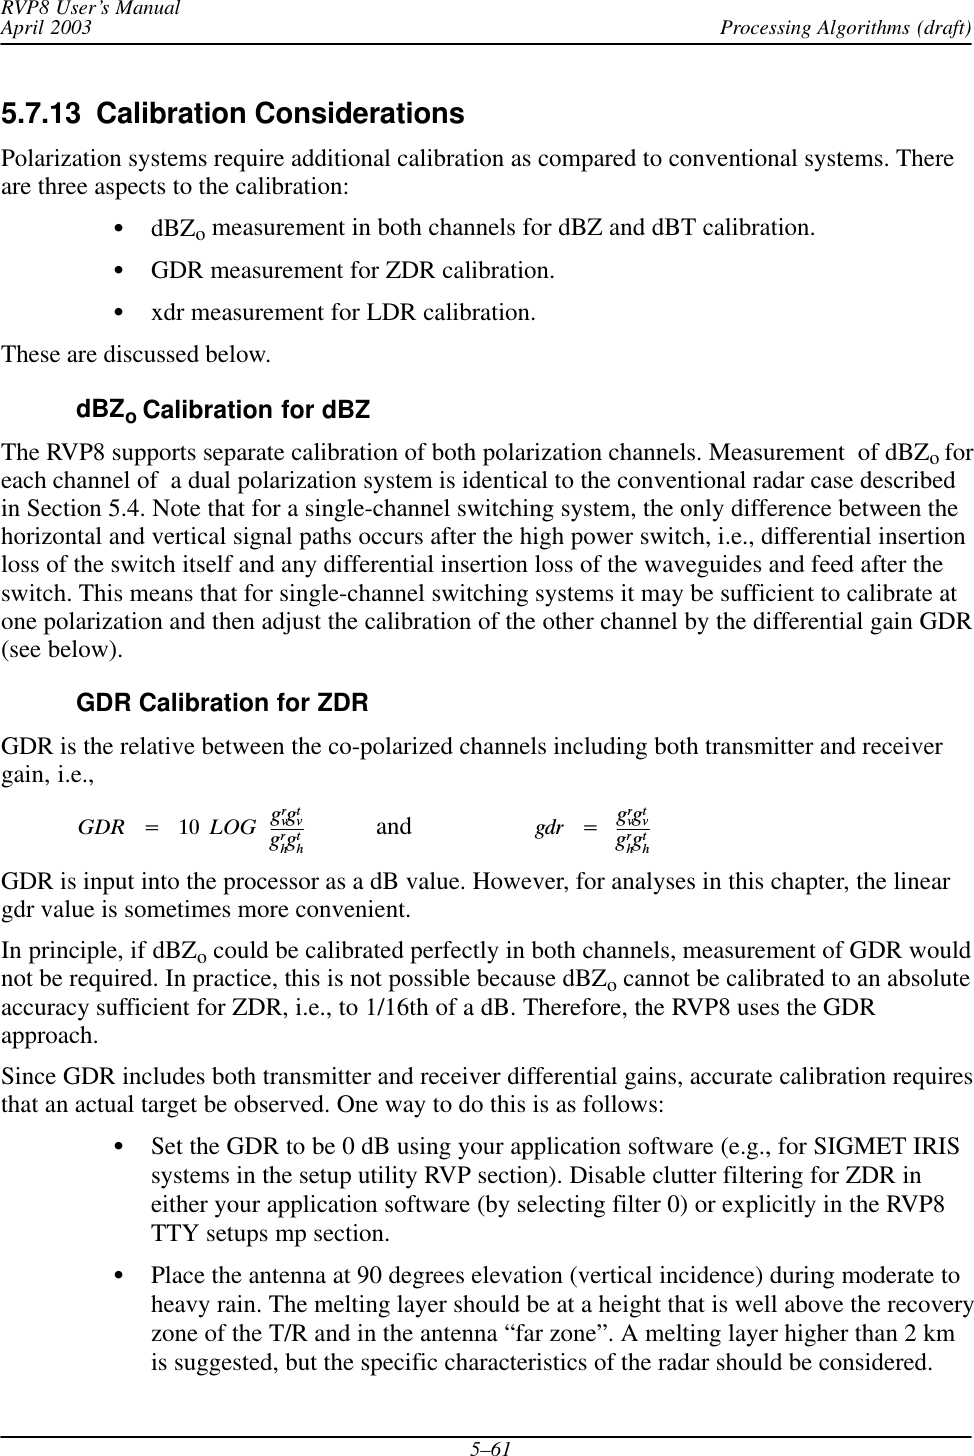 Processing Algorithms (draft)RVP8 User’s ManualApril 20035–615.7.13  Calibration ConsiderationsPolarization systems require additional calibration as compared to conventional systems. Thereare three aspects to the calibration:SdBZo measurement in both channels for dBZ and dBT calibration.SGDR measurement for ZDR calibration.Sxdr measurement for LDR calibration.These are discussed below.dBZoCalibration for dBZThe RVP8 supports separate calibration of both polarization channels. Measurement  of dBZoforeach channel of  a dual polarization system is identical to the conventional radar case describedin Section 5.4. Note that for a single-channel switching system, the only difference between thehorizontal and vertical signal paths occurs after the high power switch, i.e., differential insertionloss of the switch itself and any differential insertion loss of the waveguides and feed after theswitch. This means that for single-channel switching systems it may be sufficient to calibrate atone polarization and then adjust the calibration of the other channel by the differential gain GDR(see below).GDR Calibration for ZDRGDR is the relative between the co-polarized channels including both transmitter and receivergain, i.e.,GDRĄ+Ą 10ĄLOGĄgrvgtvgrhgthand   gdrĄ+ĄgrvgtvgrhgthGDR is input into the processor as a dB value. However, for analyses in this chapter, the lineargdr value is sometimes more convenient.In principle, if dBZo could be calibrated perfectly in both channels, measurement of GDR wouldnot be required. In practice, this is not possible because dBZo cannot be calibrated to an absoluteaccuracy sufficient for ZDR, i.e., to 1/16th of a dB. Therefore, the RVP8 uses the GDRapproach.Since GDR includes both transmitter and receiver differential gains, accurate calibration requiresthat an actual target be observed. One way to do this is as follows:SSet the GDR to be 0 dB using your application software (e.g., for SIGMET IRISsystems in the setup utility RVP section). Disable clutter filtering for ZDR ineither your application software (by selecting filter 0) or explicitly in the RVP8TTY setups mp section.SPlace the antenna at 90 degrees elevation (vertical incidence) during moderate toheavy rain. The melting layer should be at a height that is well above the recoveryzone of the T/R and in the antenna “far zone”. A melting layer higher than 2 kmis suggested, but the specific characteristics of the radar should be considered.